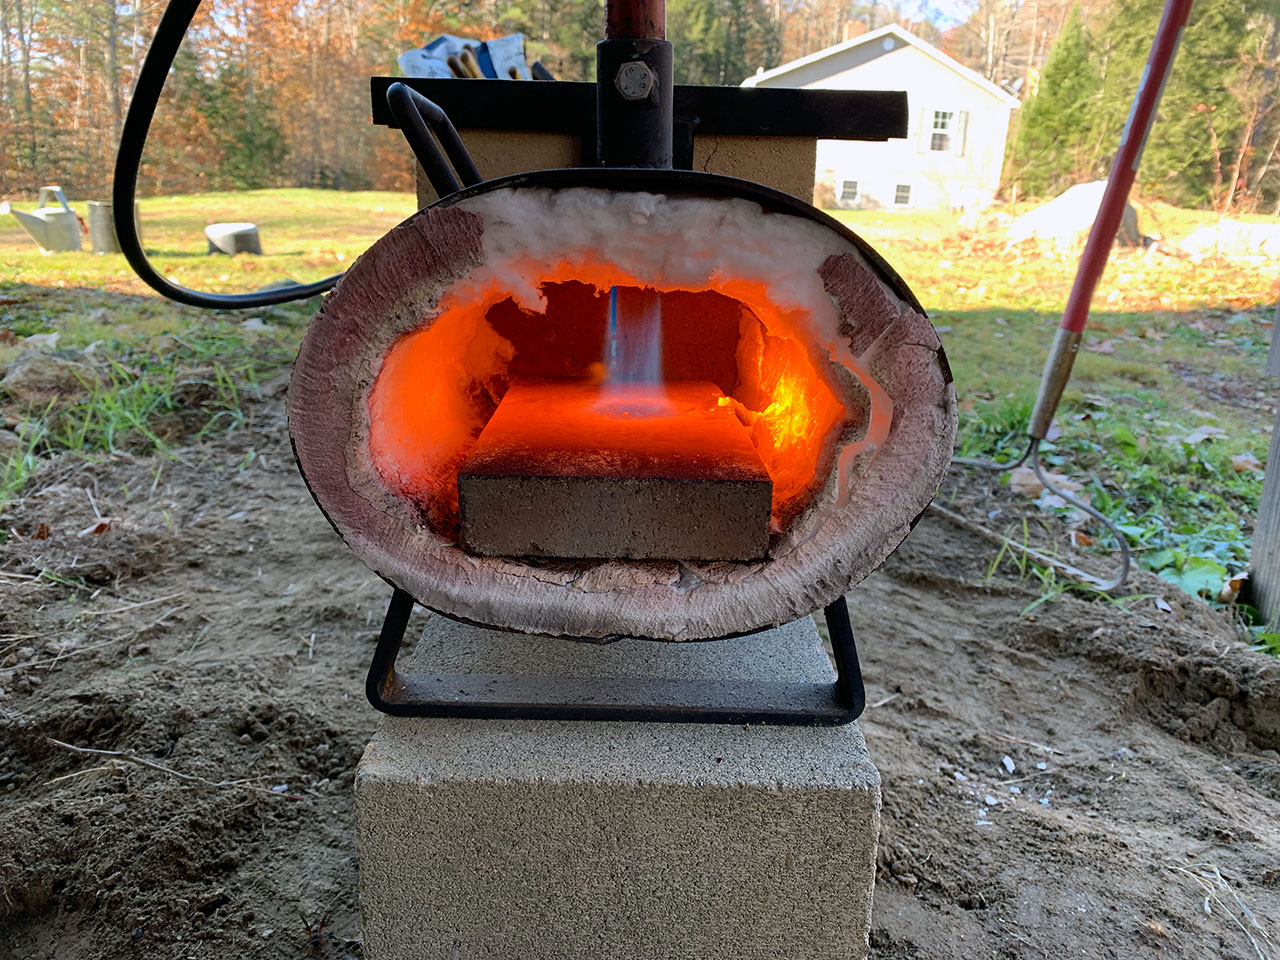 Propane forge critique - Gas Forges - I Forge Iron